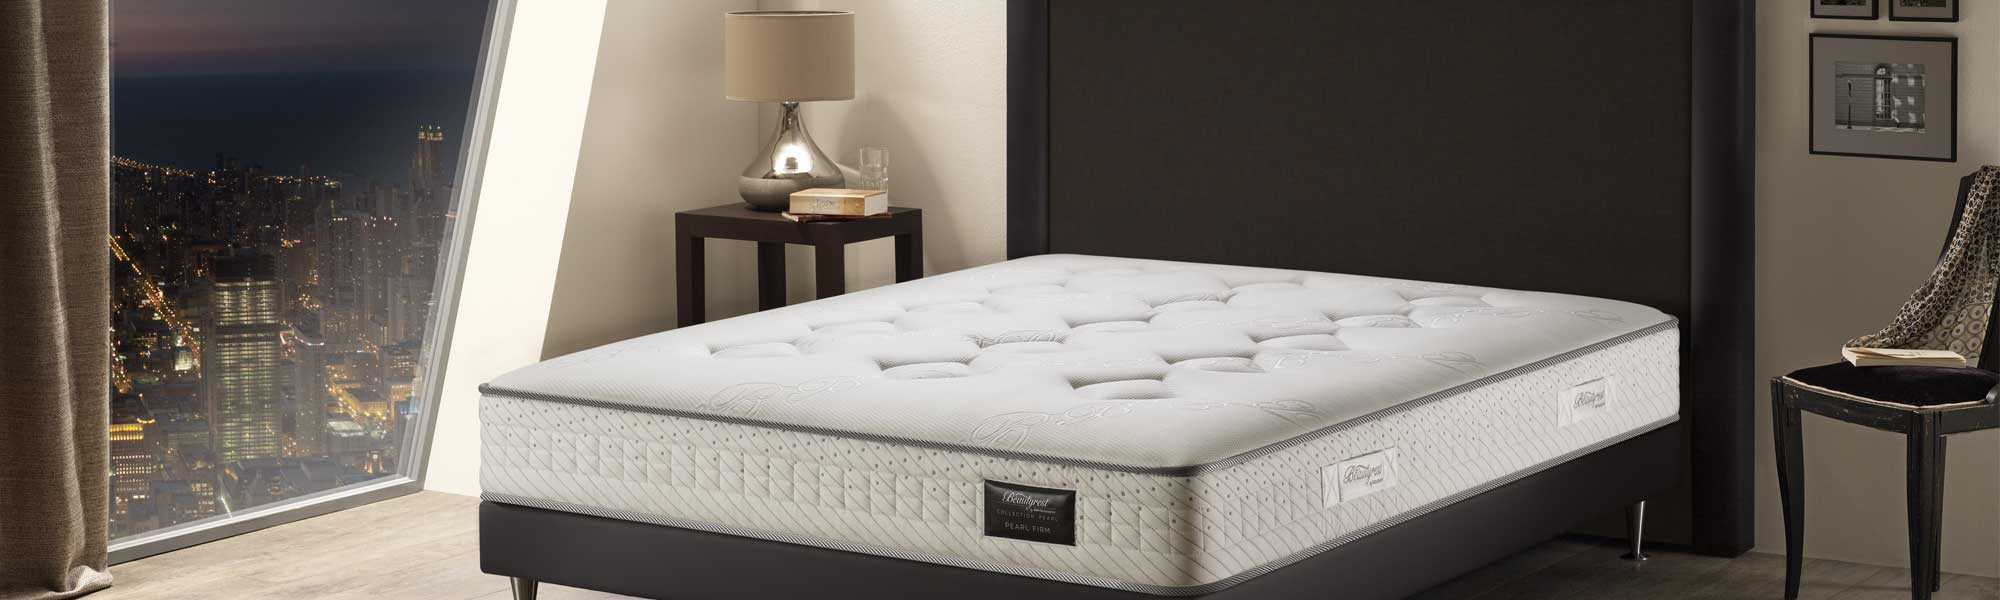 King Size Bed The For A Good Sleep, What Size Is A King Bed Mattress